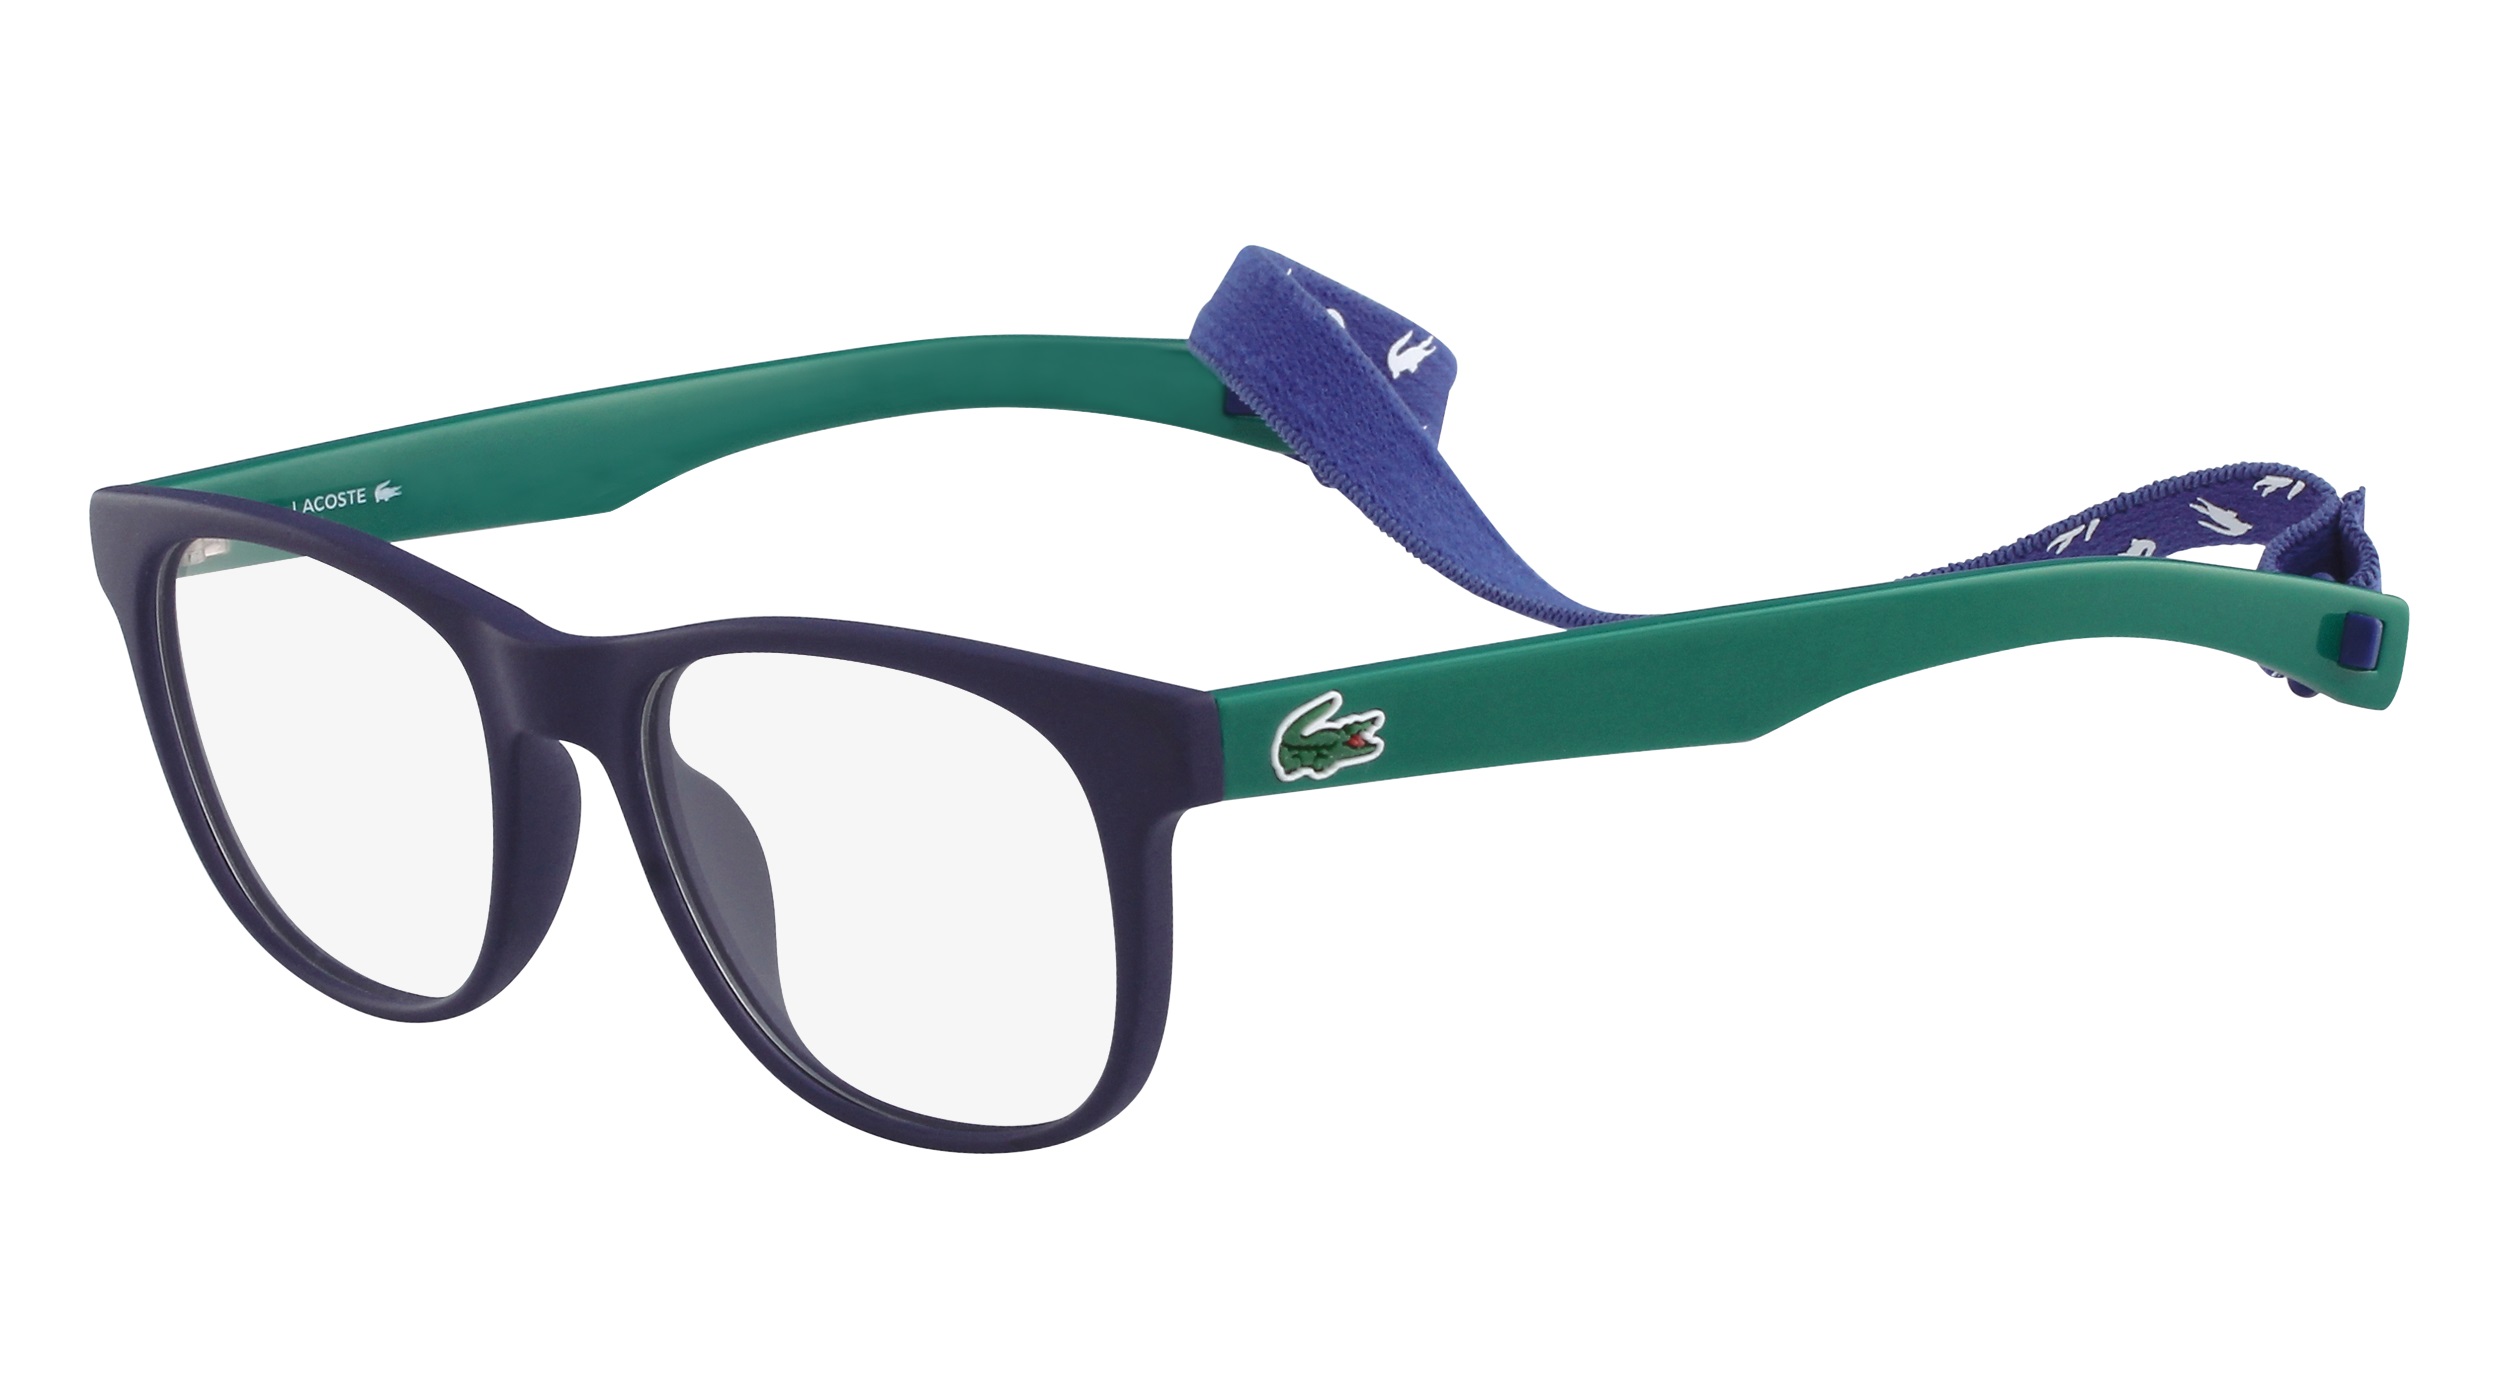 Lacoste L3621 Kids. Incredible 